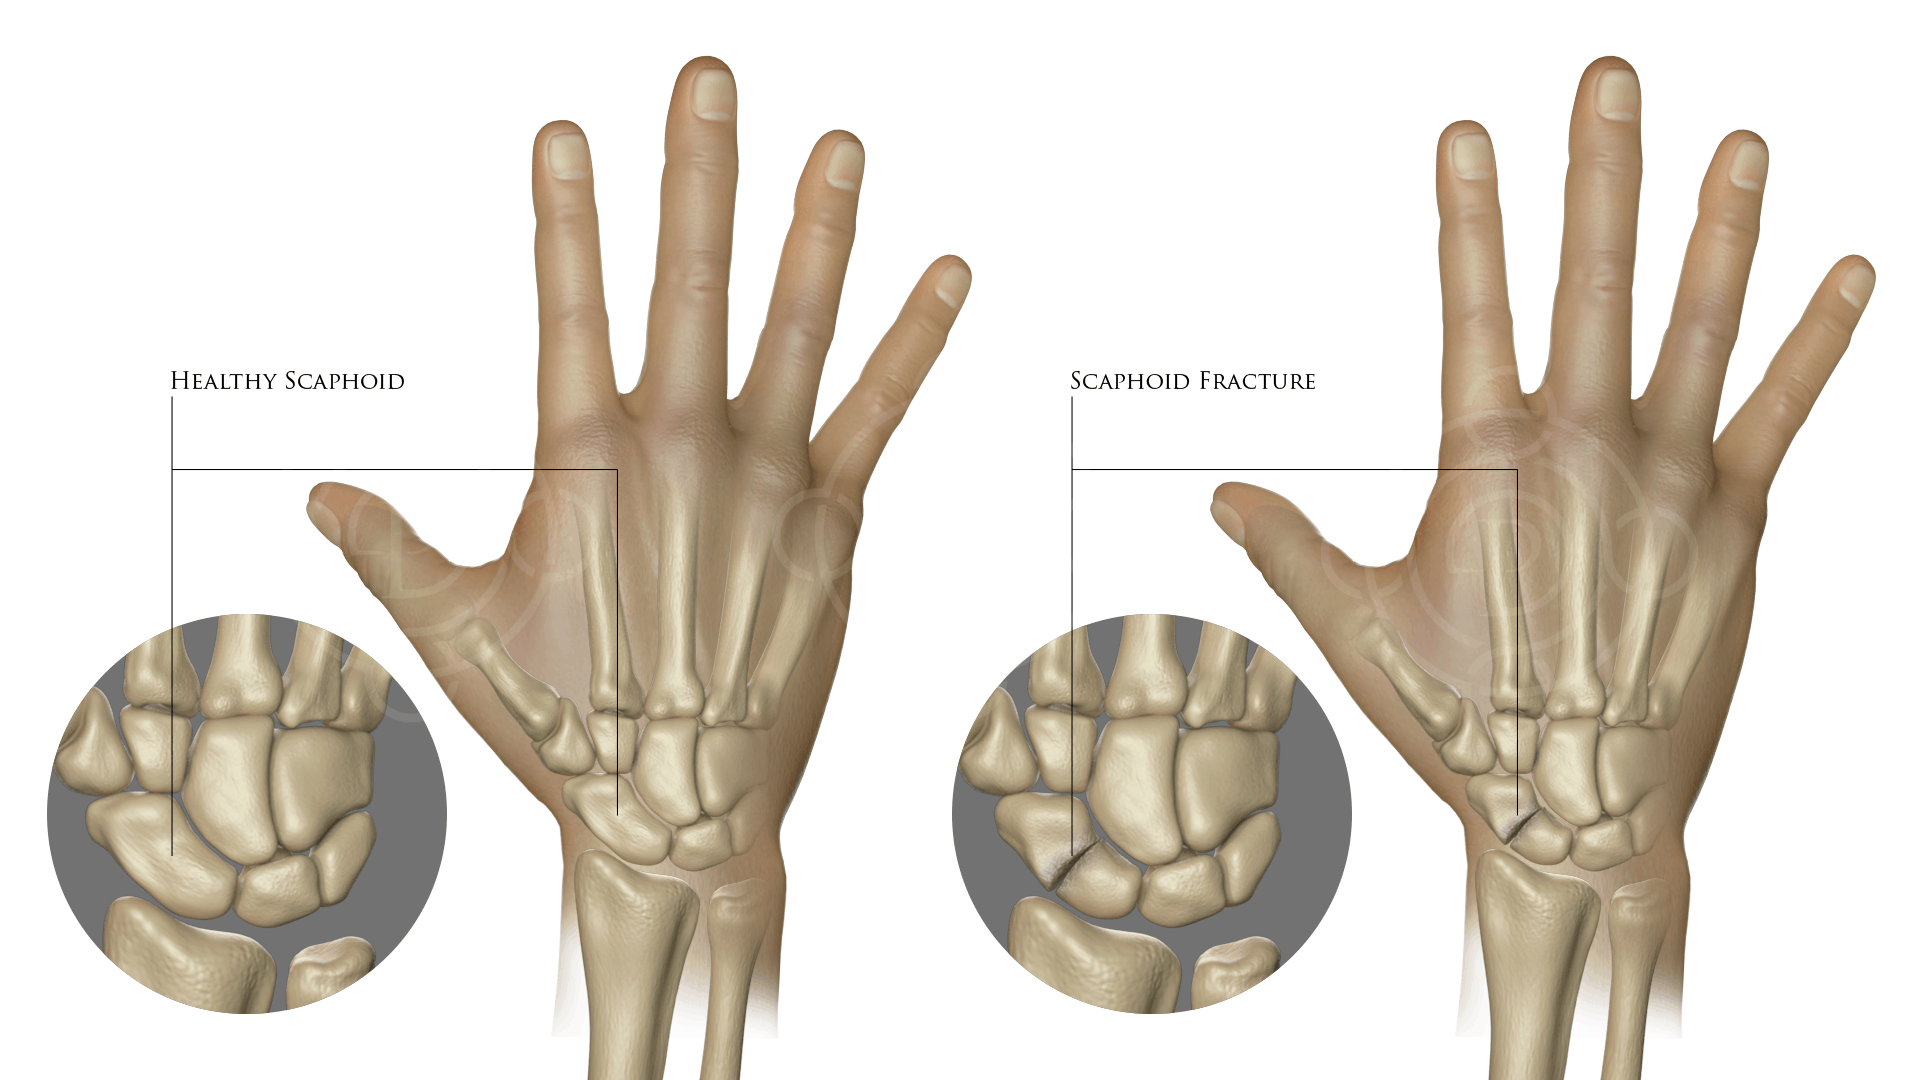 Healthy Scaphoid and Scaphoid Fracture